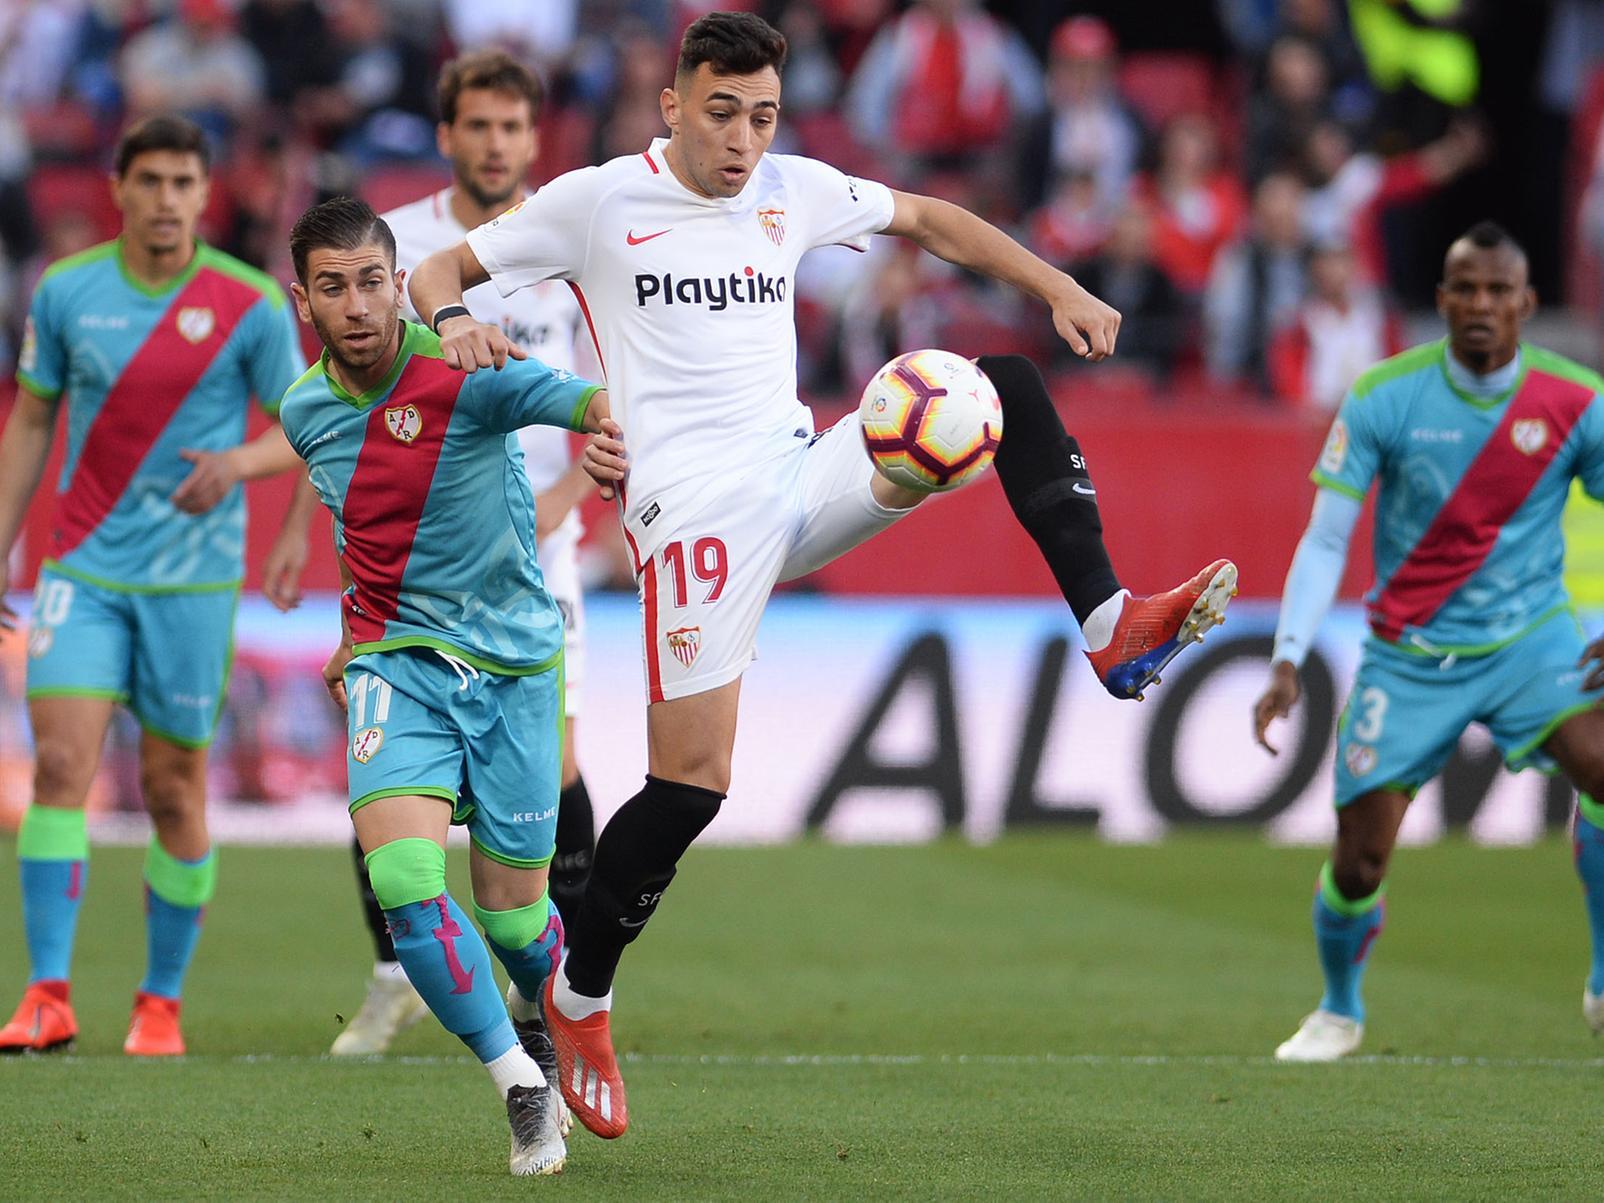 Leeds United's chances of signing reported target Adri Embarba look to have taken a hit, with his club, Rayo Vallecano, holding out for his 8.5m release to be matched. (HITC)